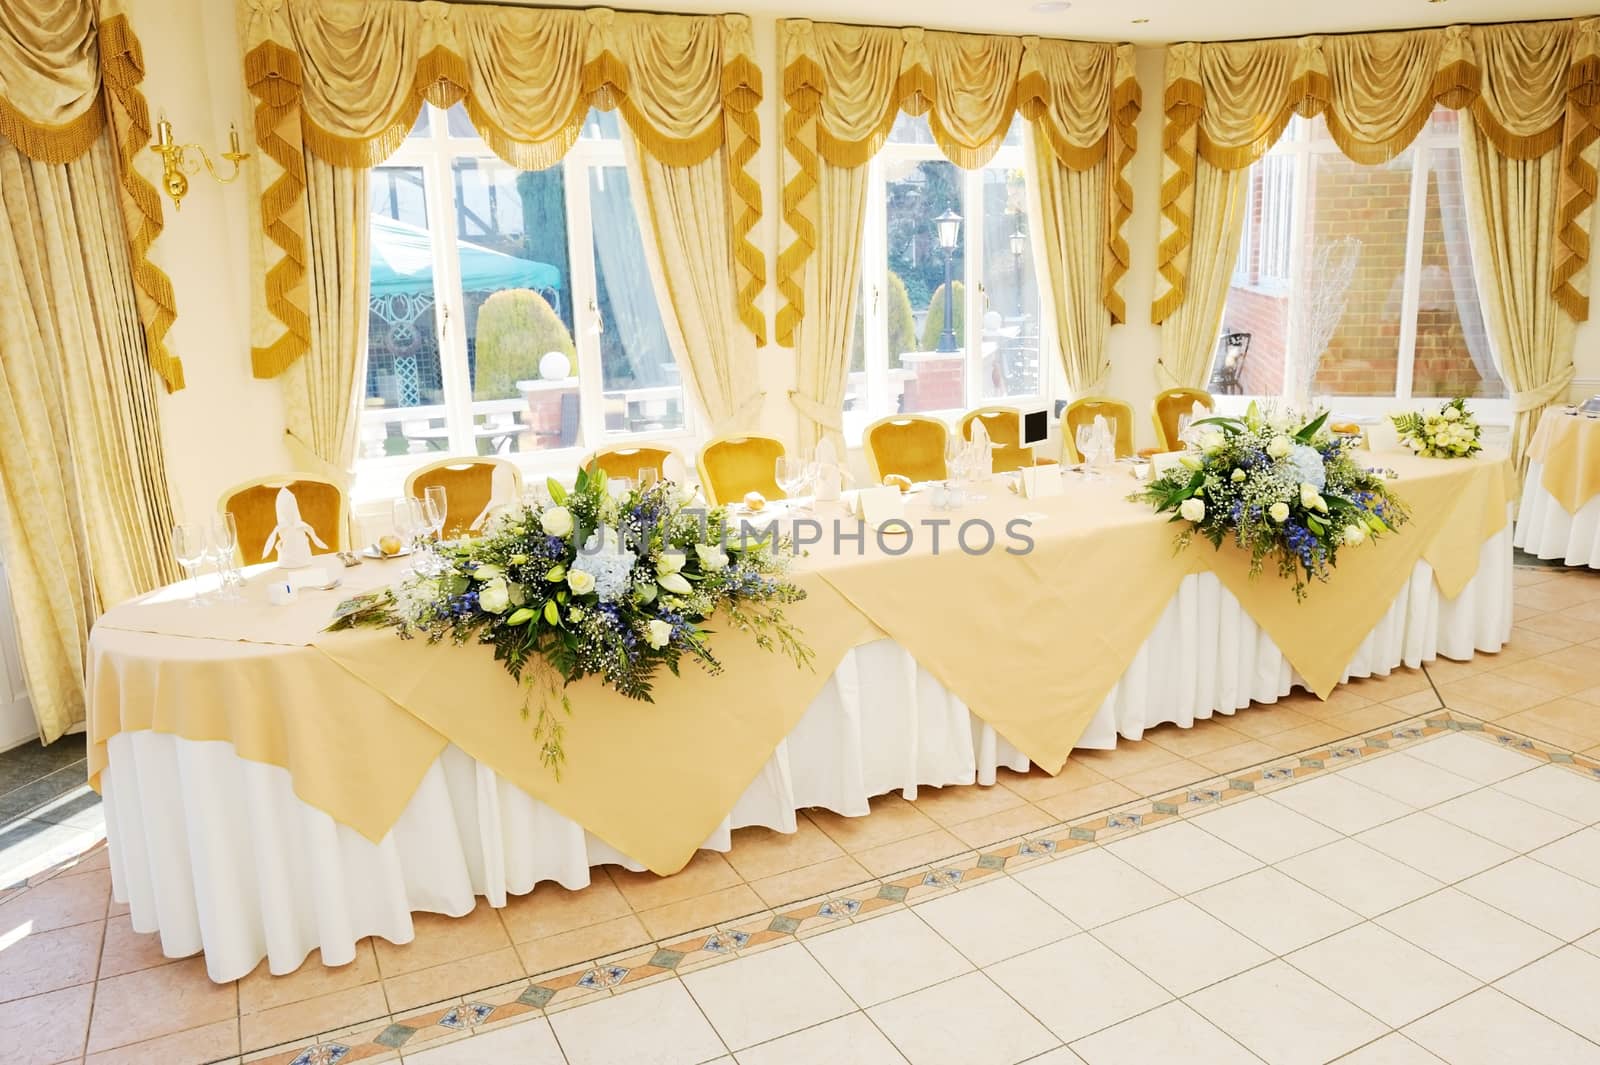 Decoration of flowers on head table at wedding reception